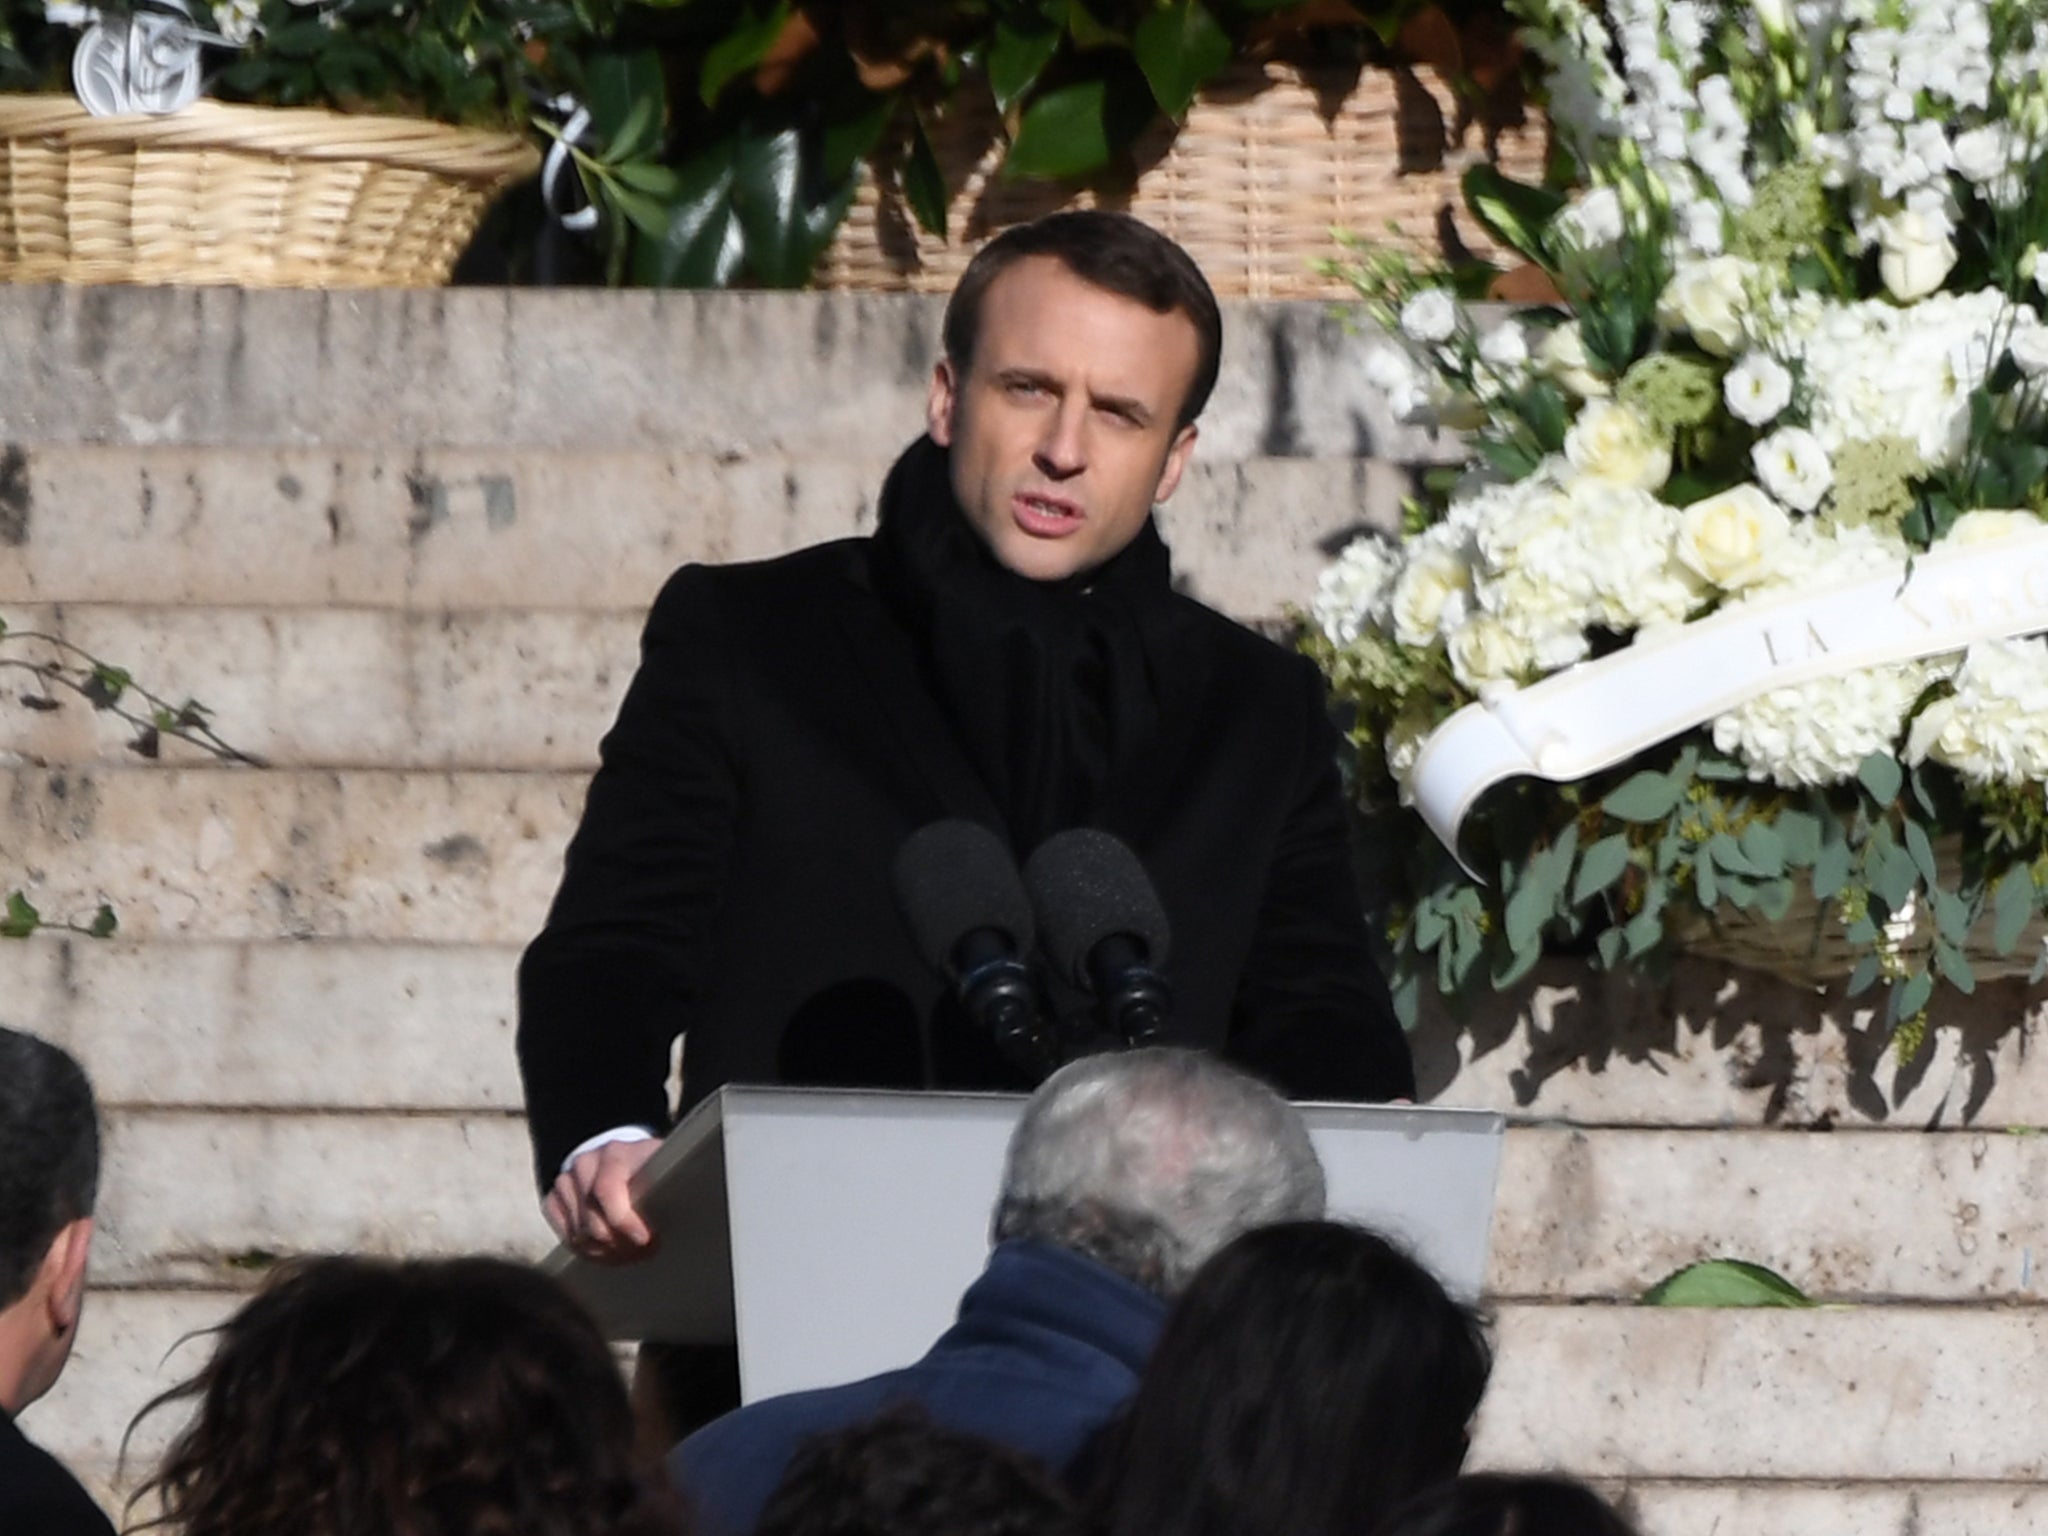 President Macron delivers a speech outside La Madeleine Church at the start of Johnny Hallyday’s funeral